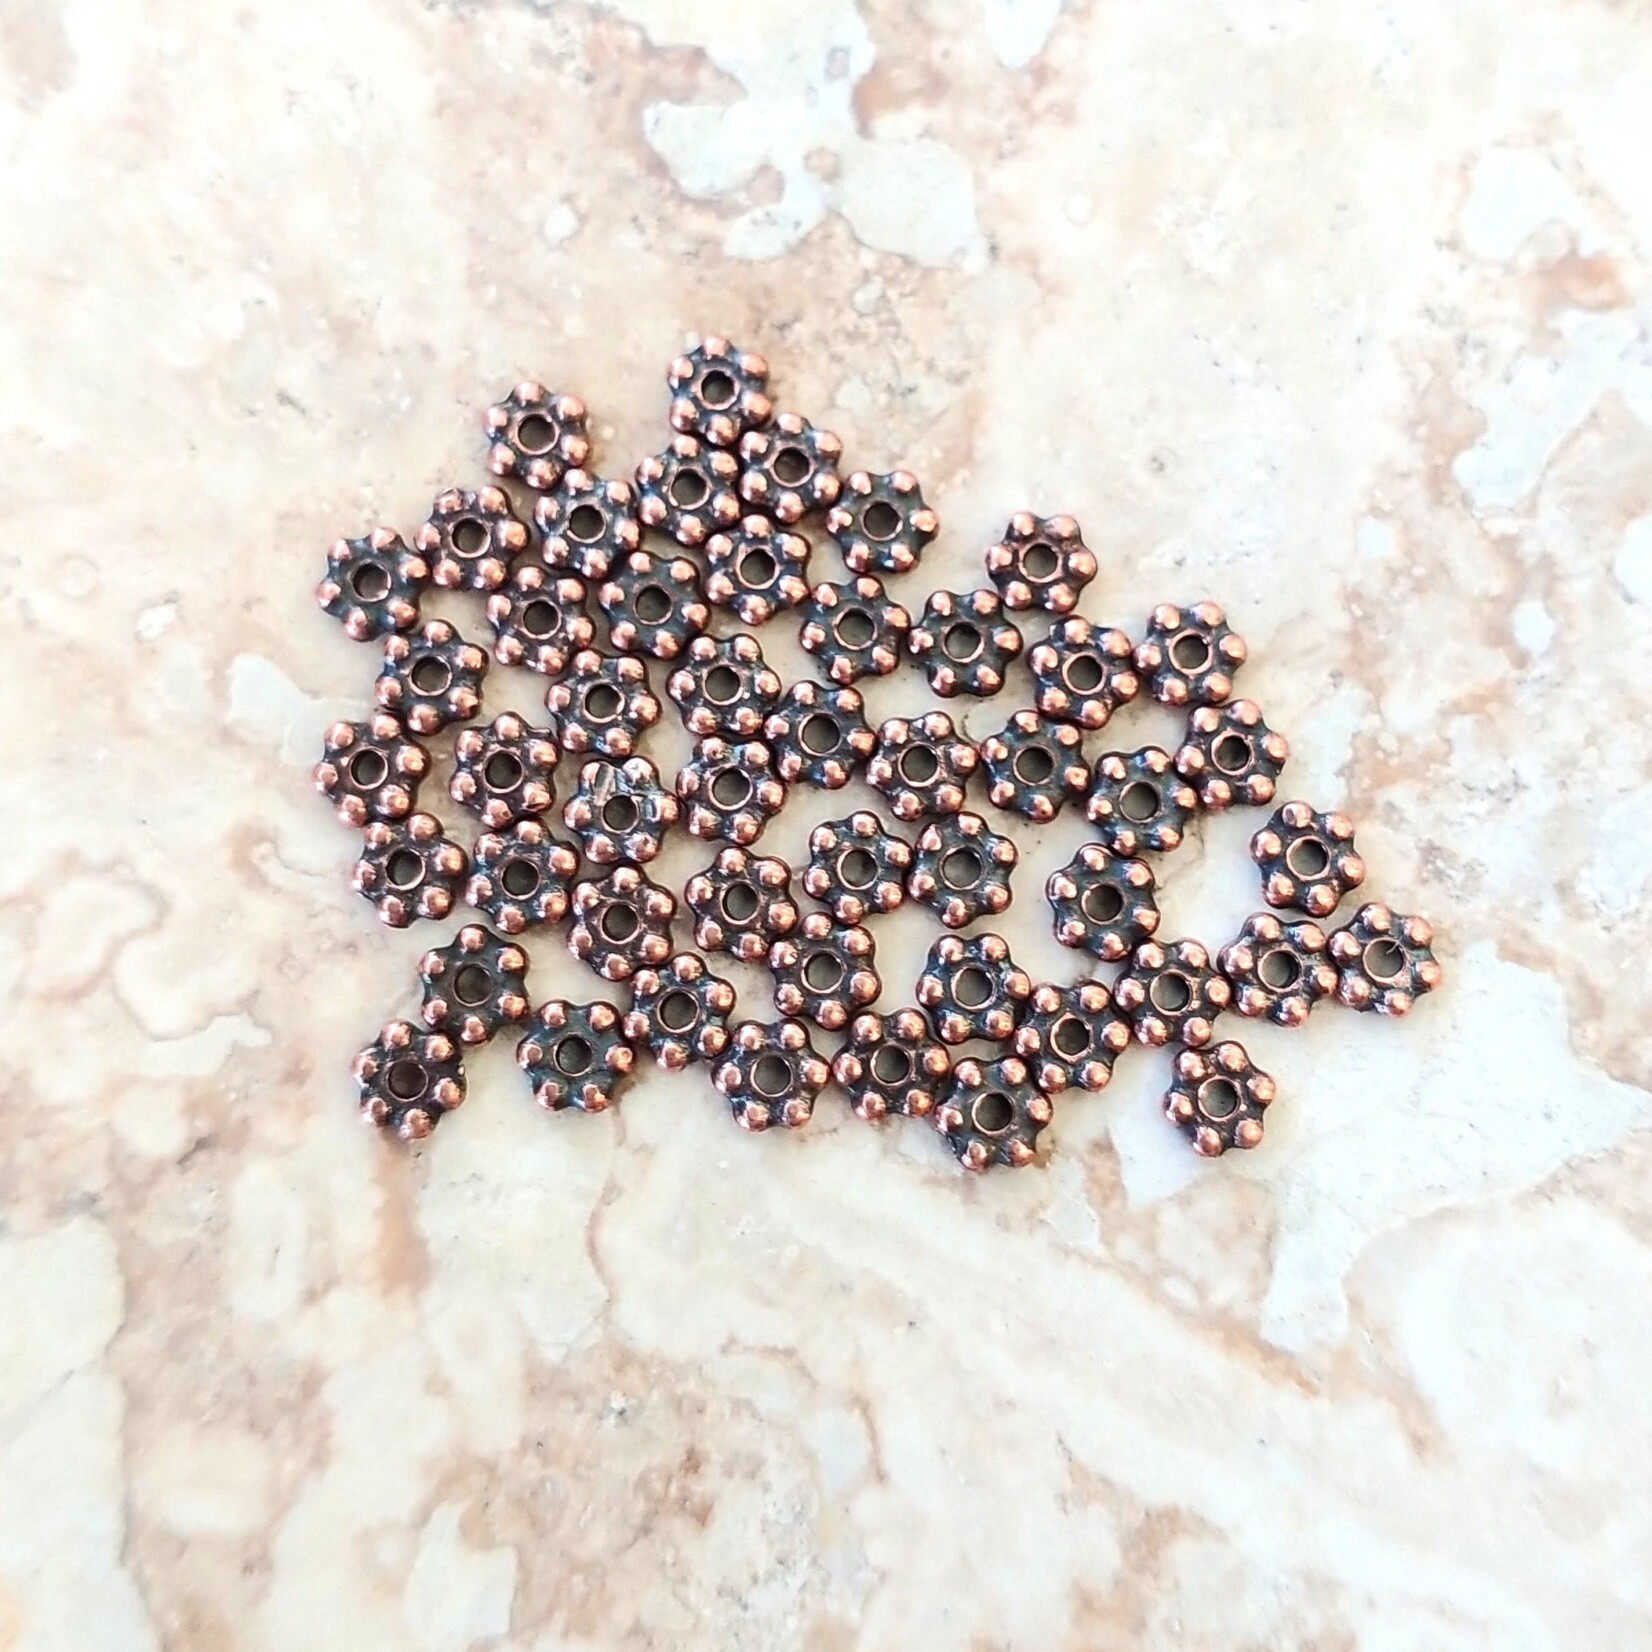 Beaded 3mm Daisy Spacer Bead Antique Copper Plated - 50 pieces